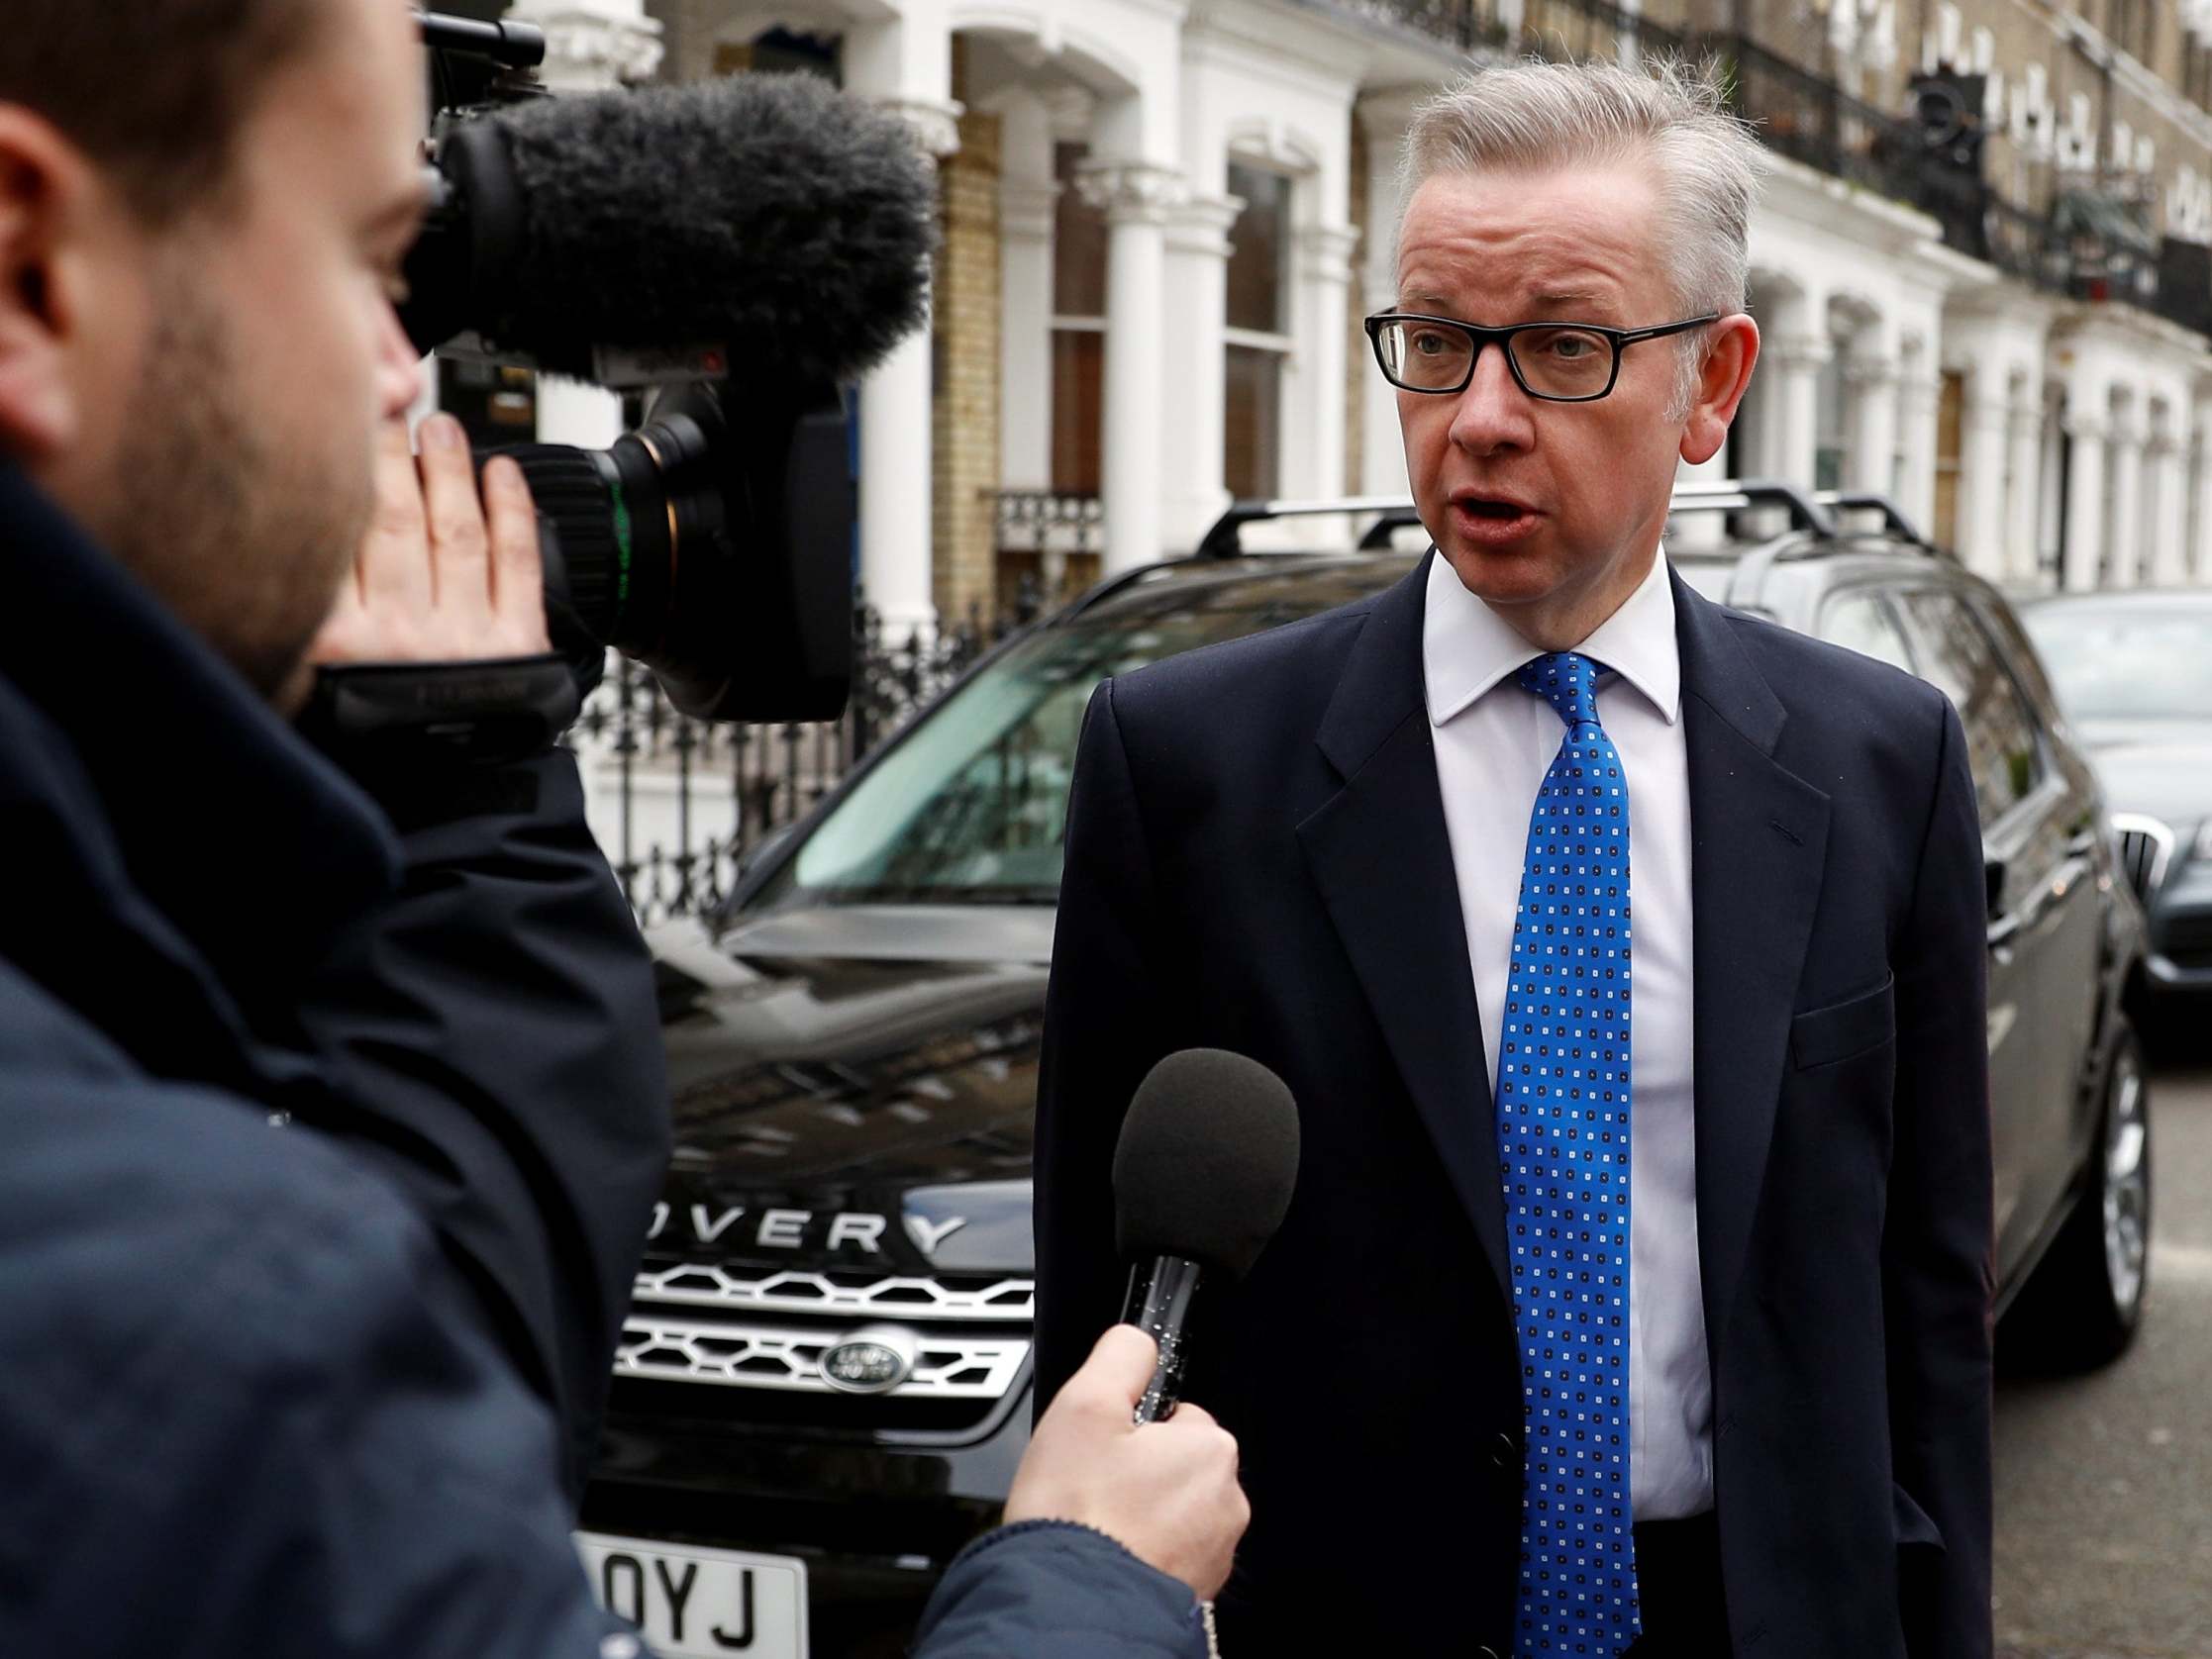 Mr Gove’s confession is unusual mostly in its directness